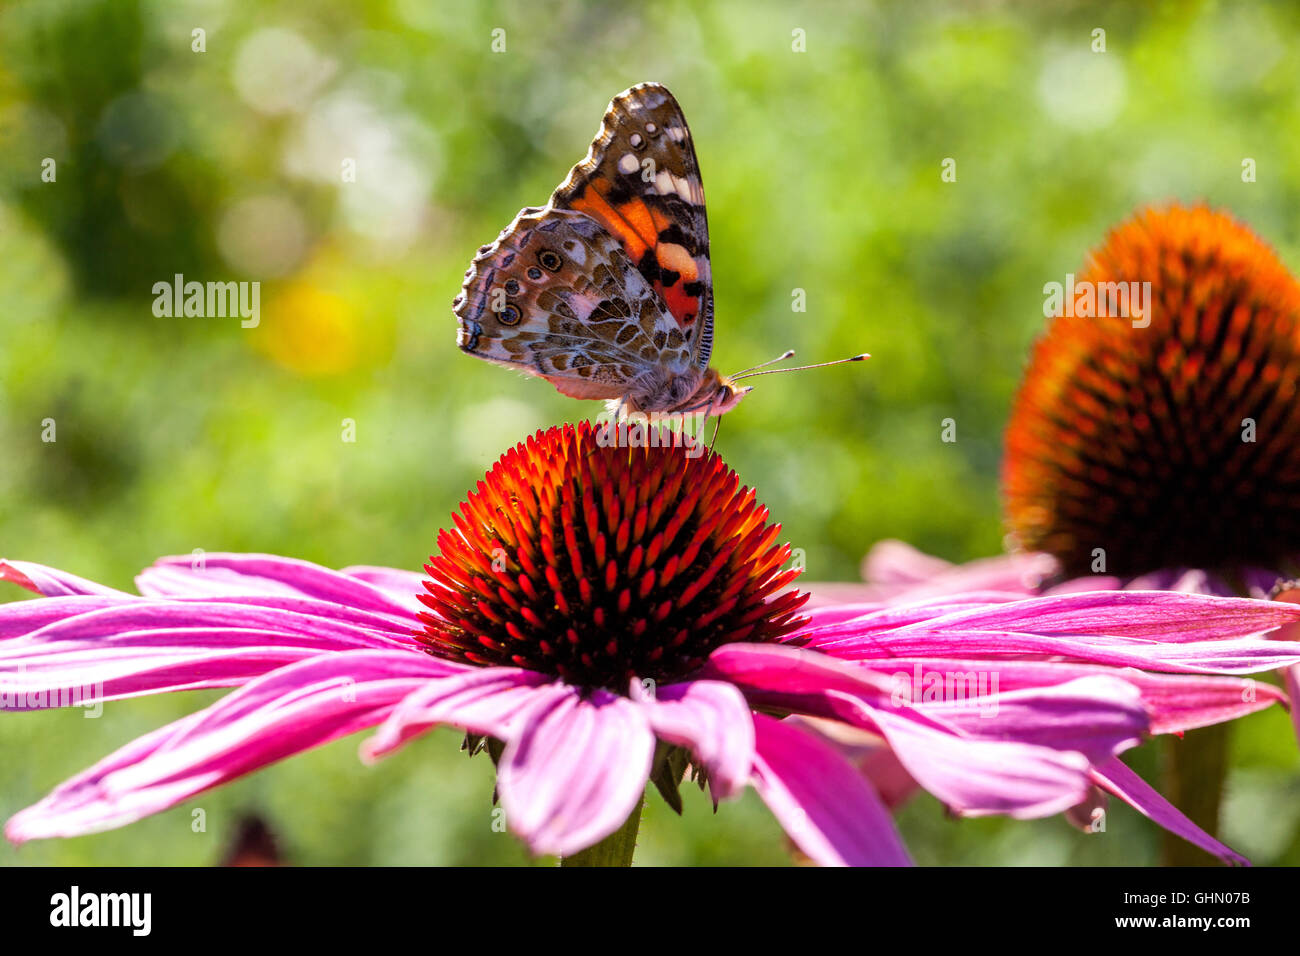 Painted lady butterfly Vanessa cardui on Purple coneflower Echinacea butterfly on August flower in a garden Stock Photo